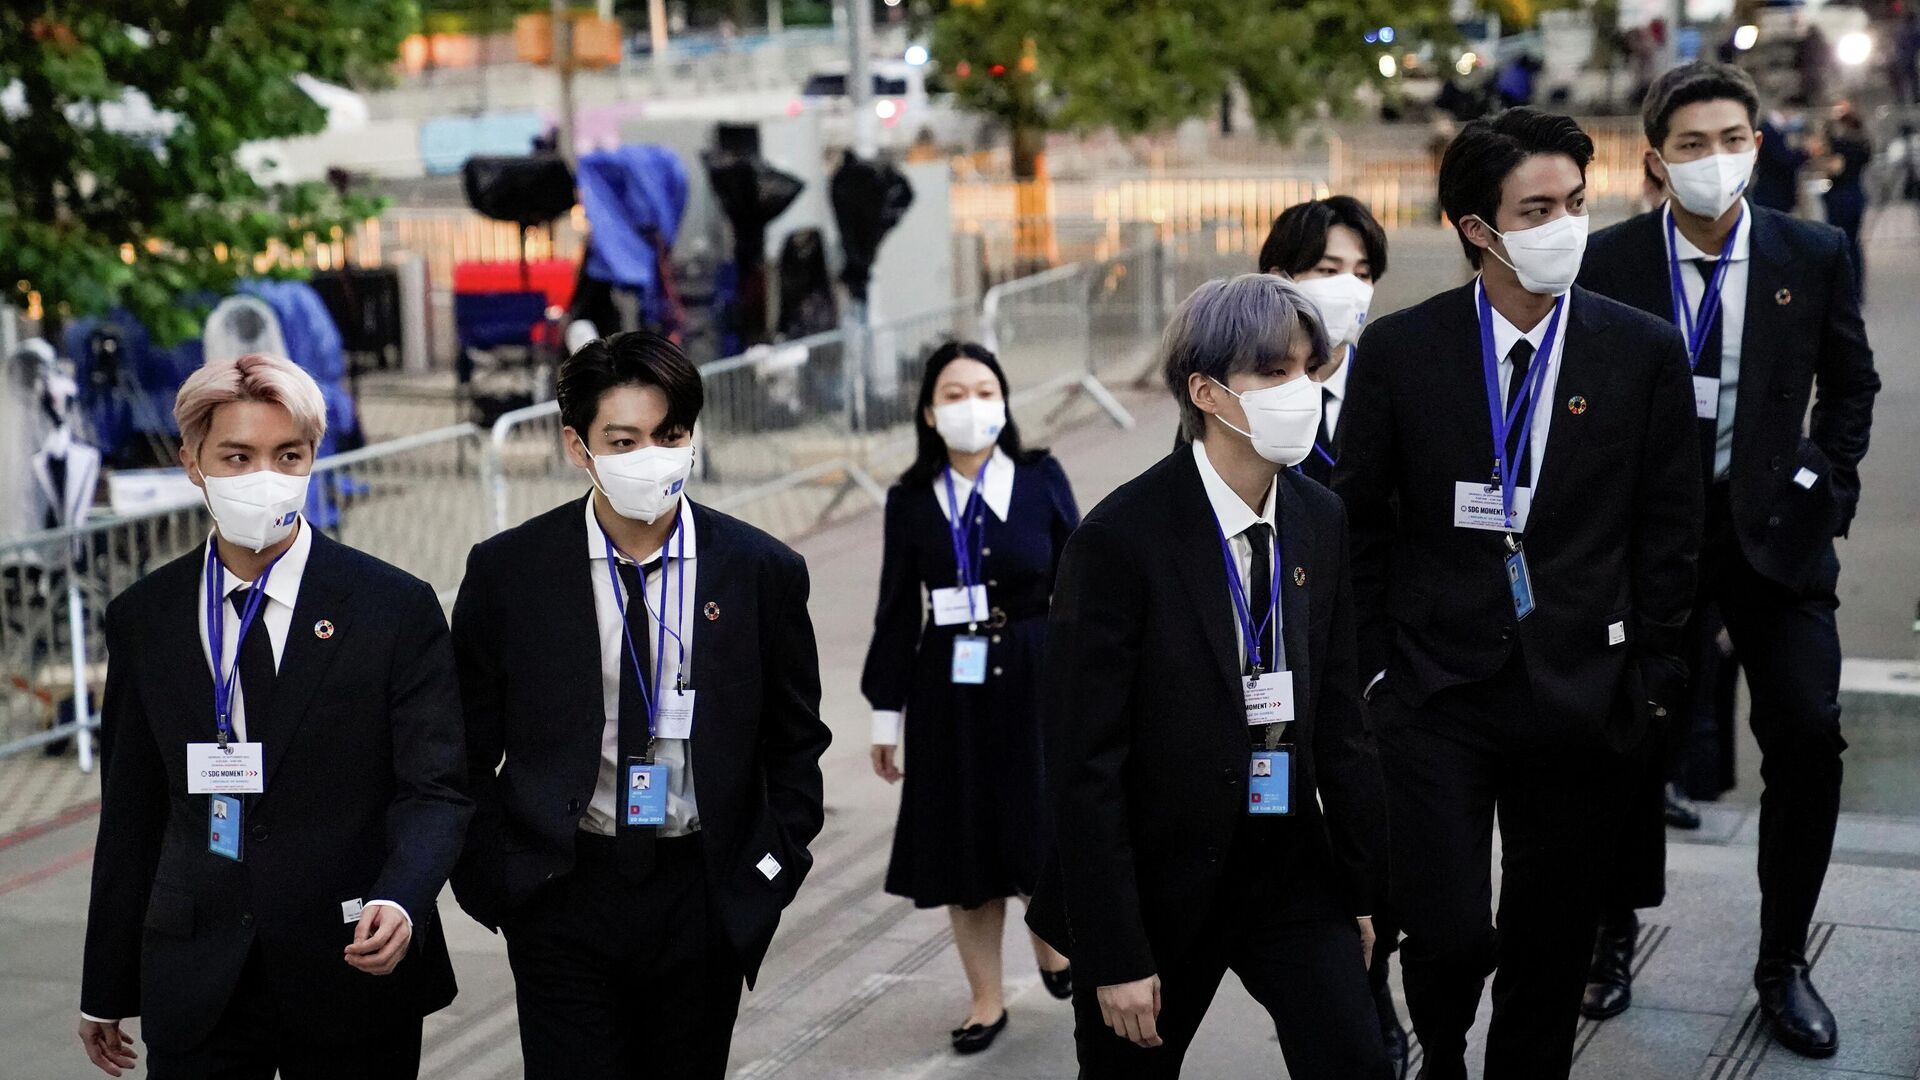 Members of the South Korean band BTS arrive at security check-in at the United Nations headquarters during the 76th Session of the U.N. General Assembly, in New York, U.S. September 20, 2021 - Sputnik International, 1920, 28.09.2021